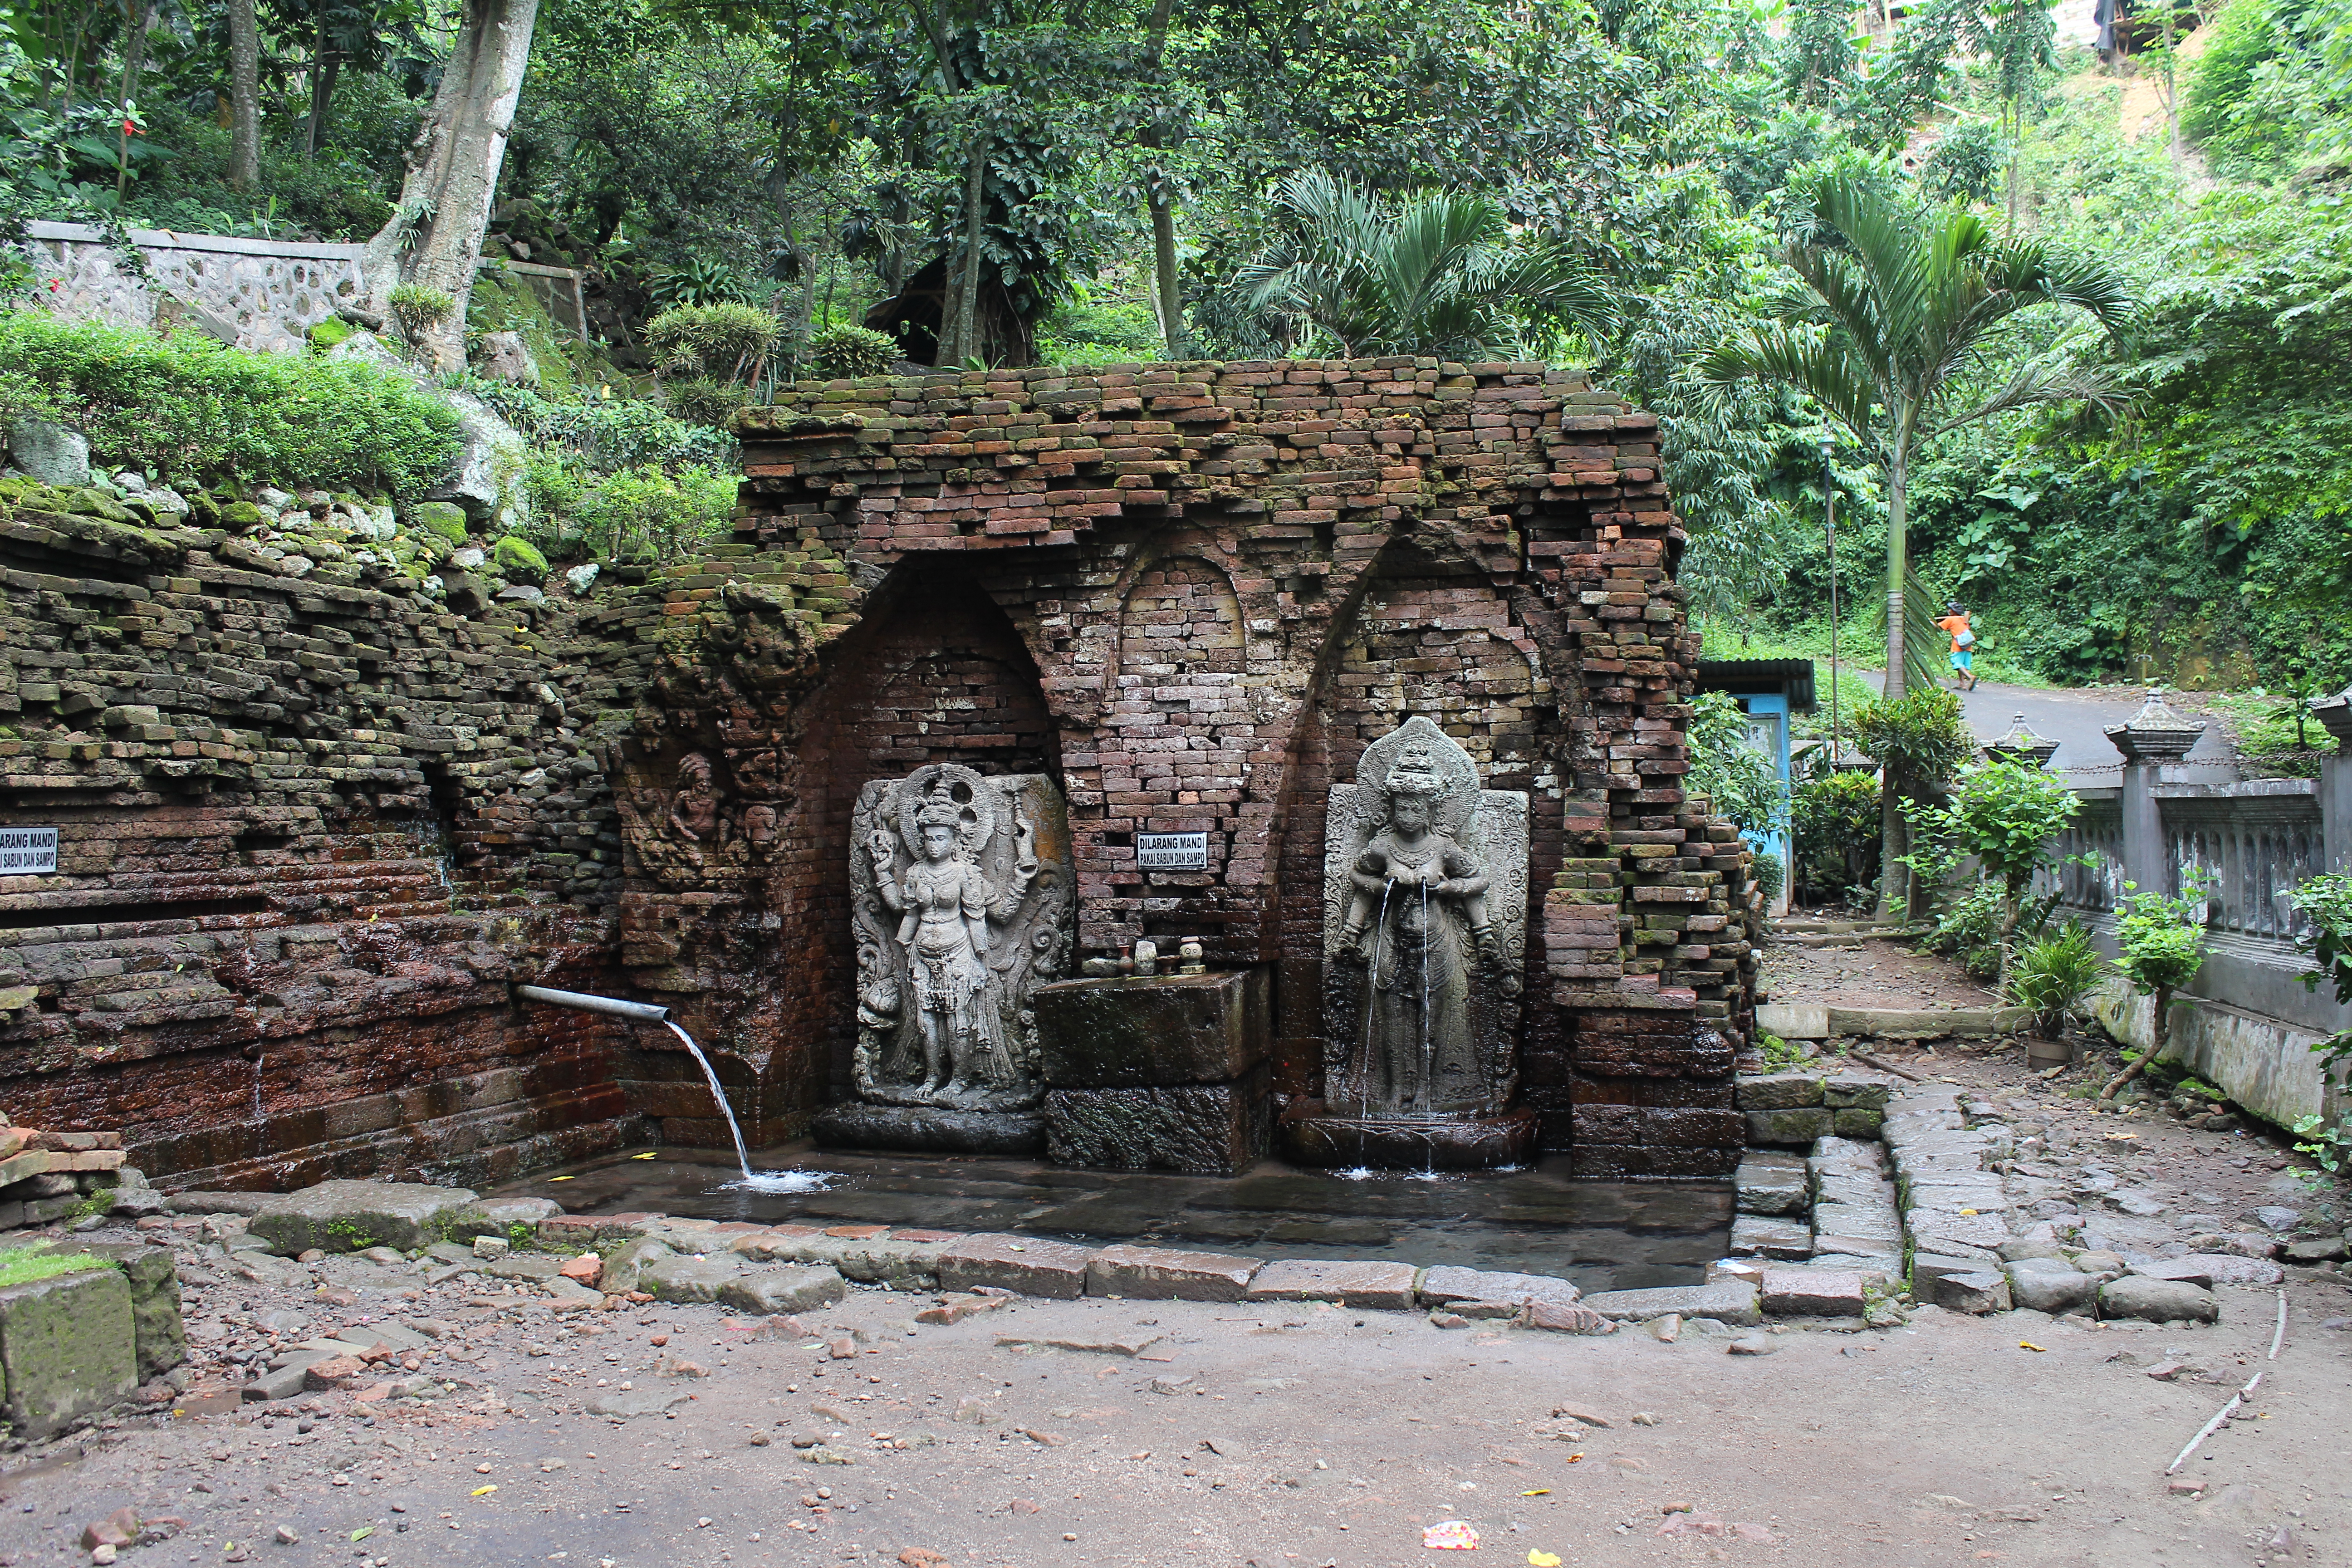 Bathing place with water streaming from female statues